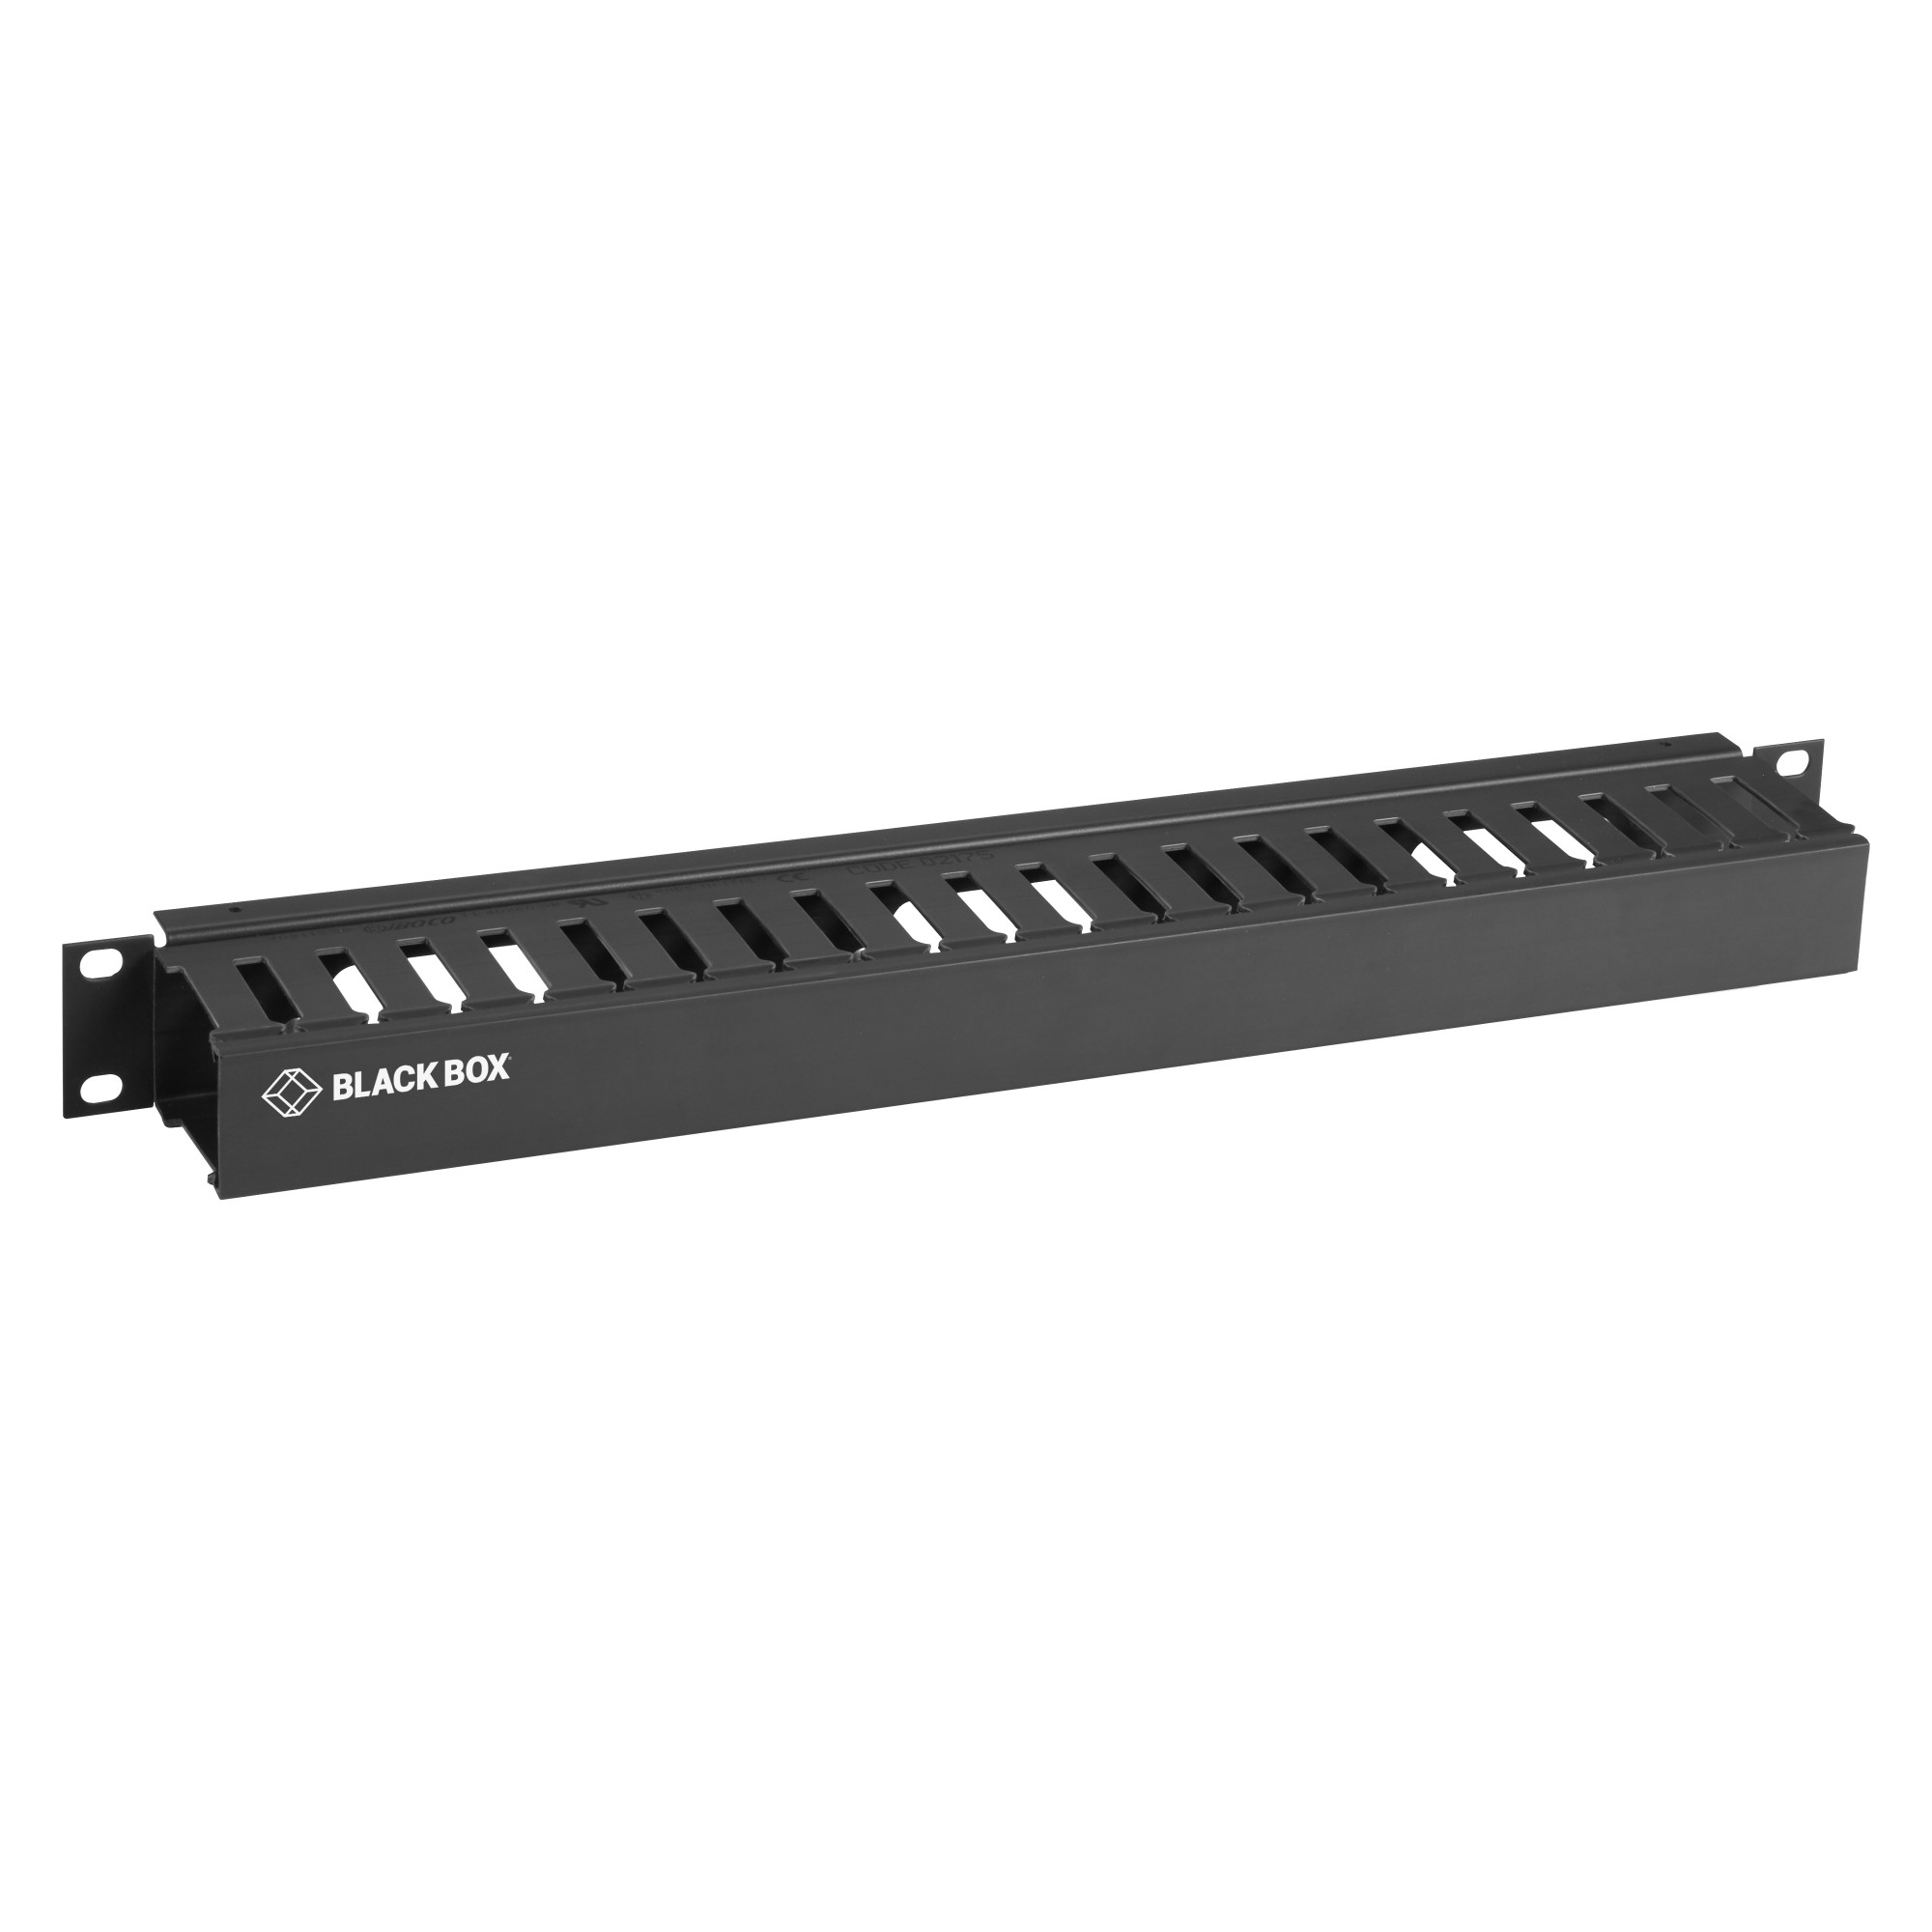 RMT100A-R4 BLACK BOX RACKMOUNT HORIZONTAL FINGER DUCT CABLE MANAGER WITH COVER - 1U, 19